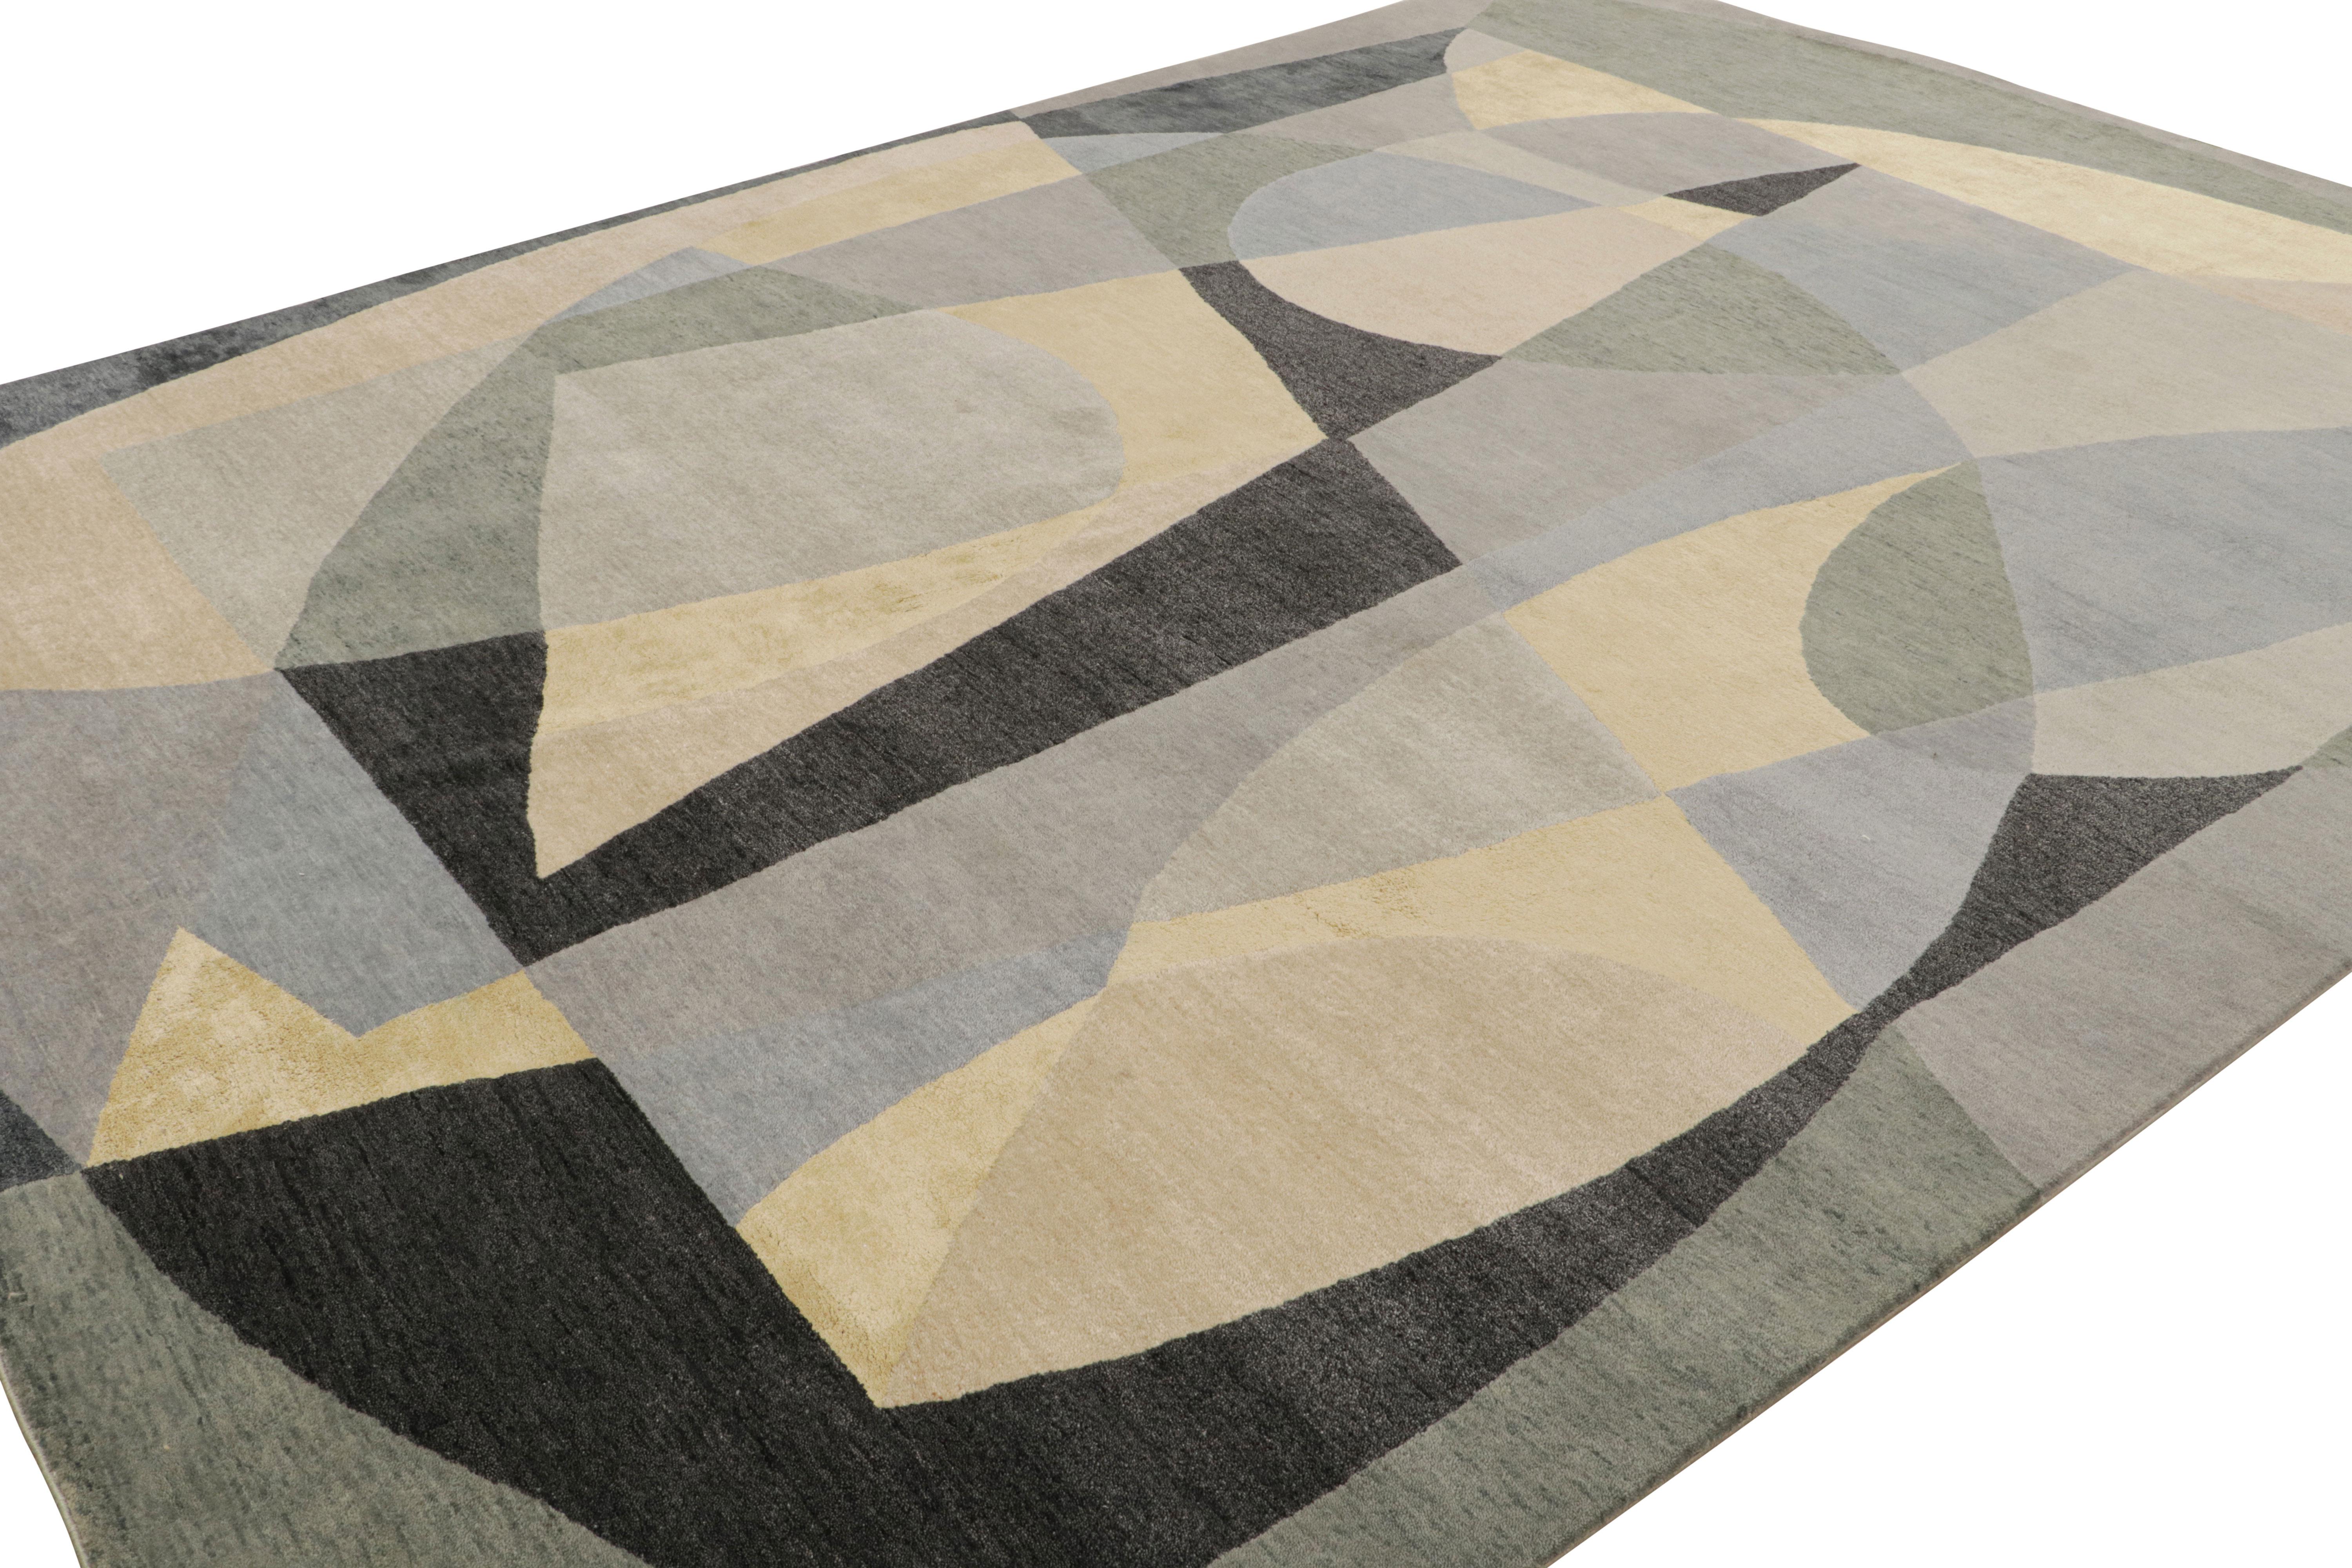 This 9x12 rug is from Rug & Kilim’s Mid-Century Modern collection - hand-knotted in wool and silk

On the Design:

Keen eyes will admire silver-gray, blue, light green, cream and black tones underscoring a geometric pattern inspired by the 1950s art